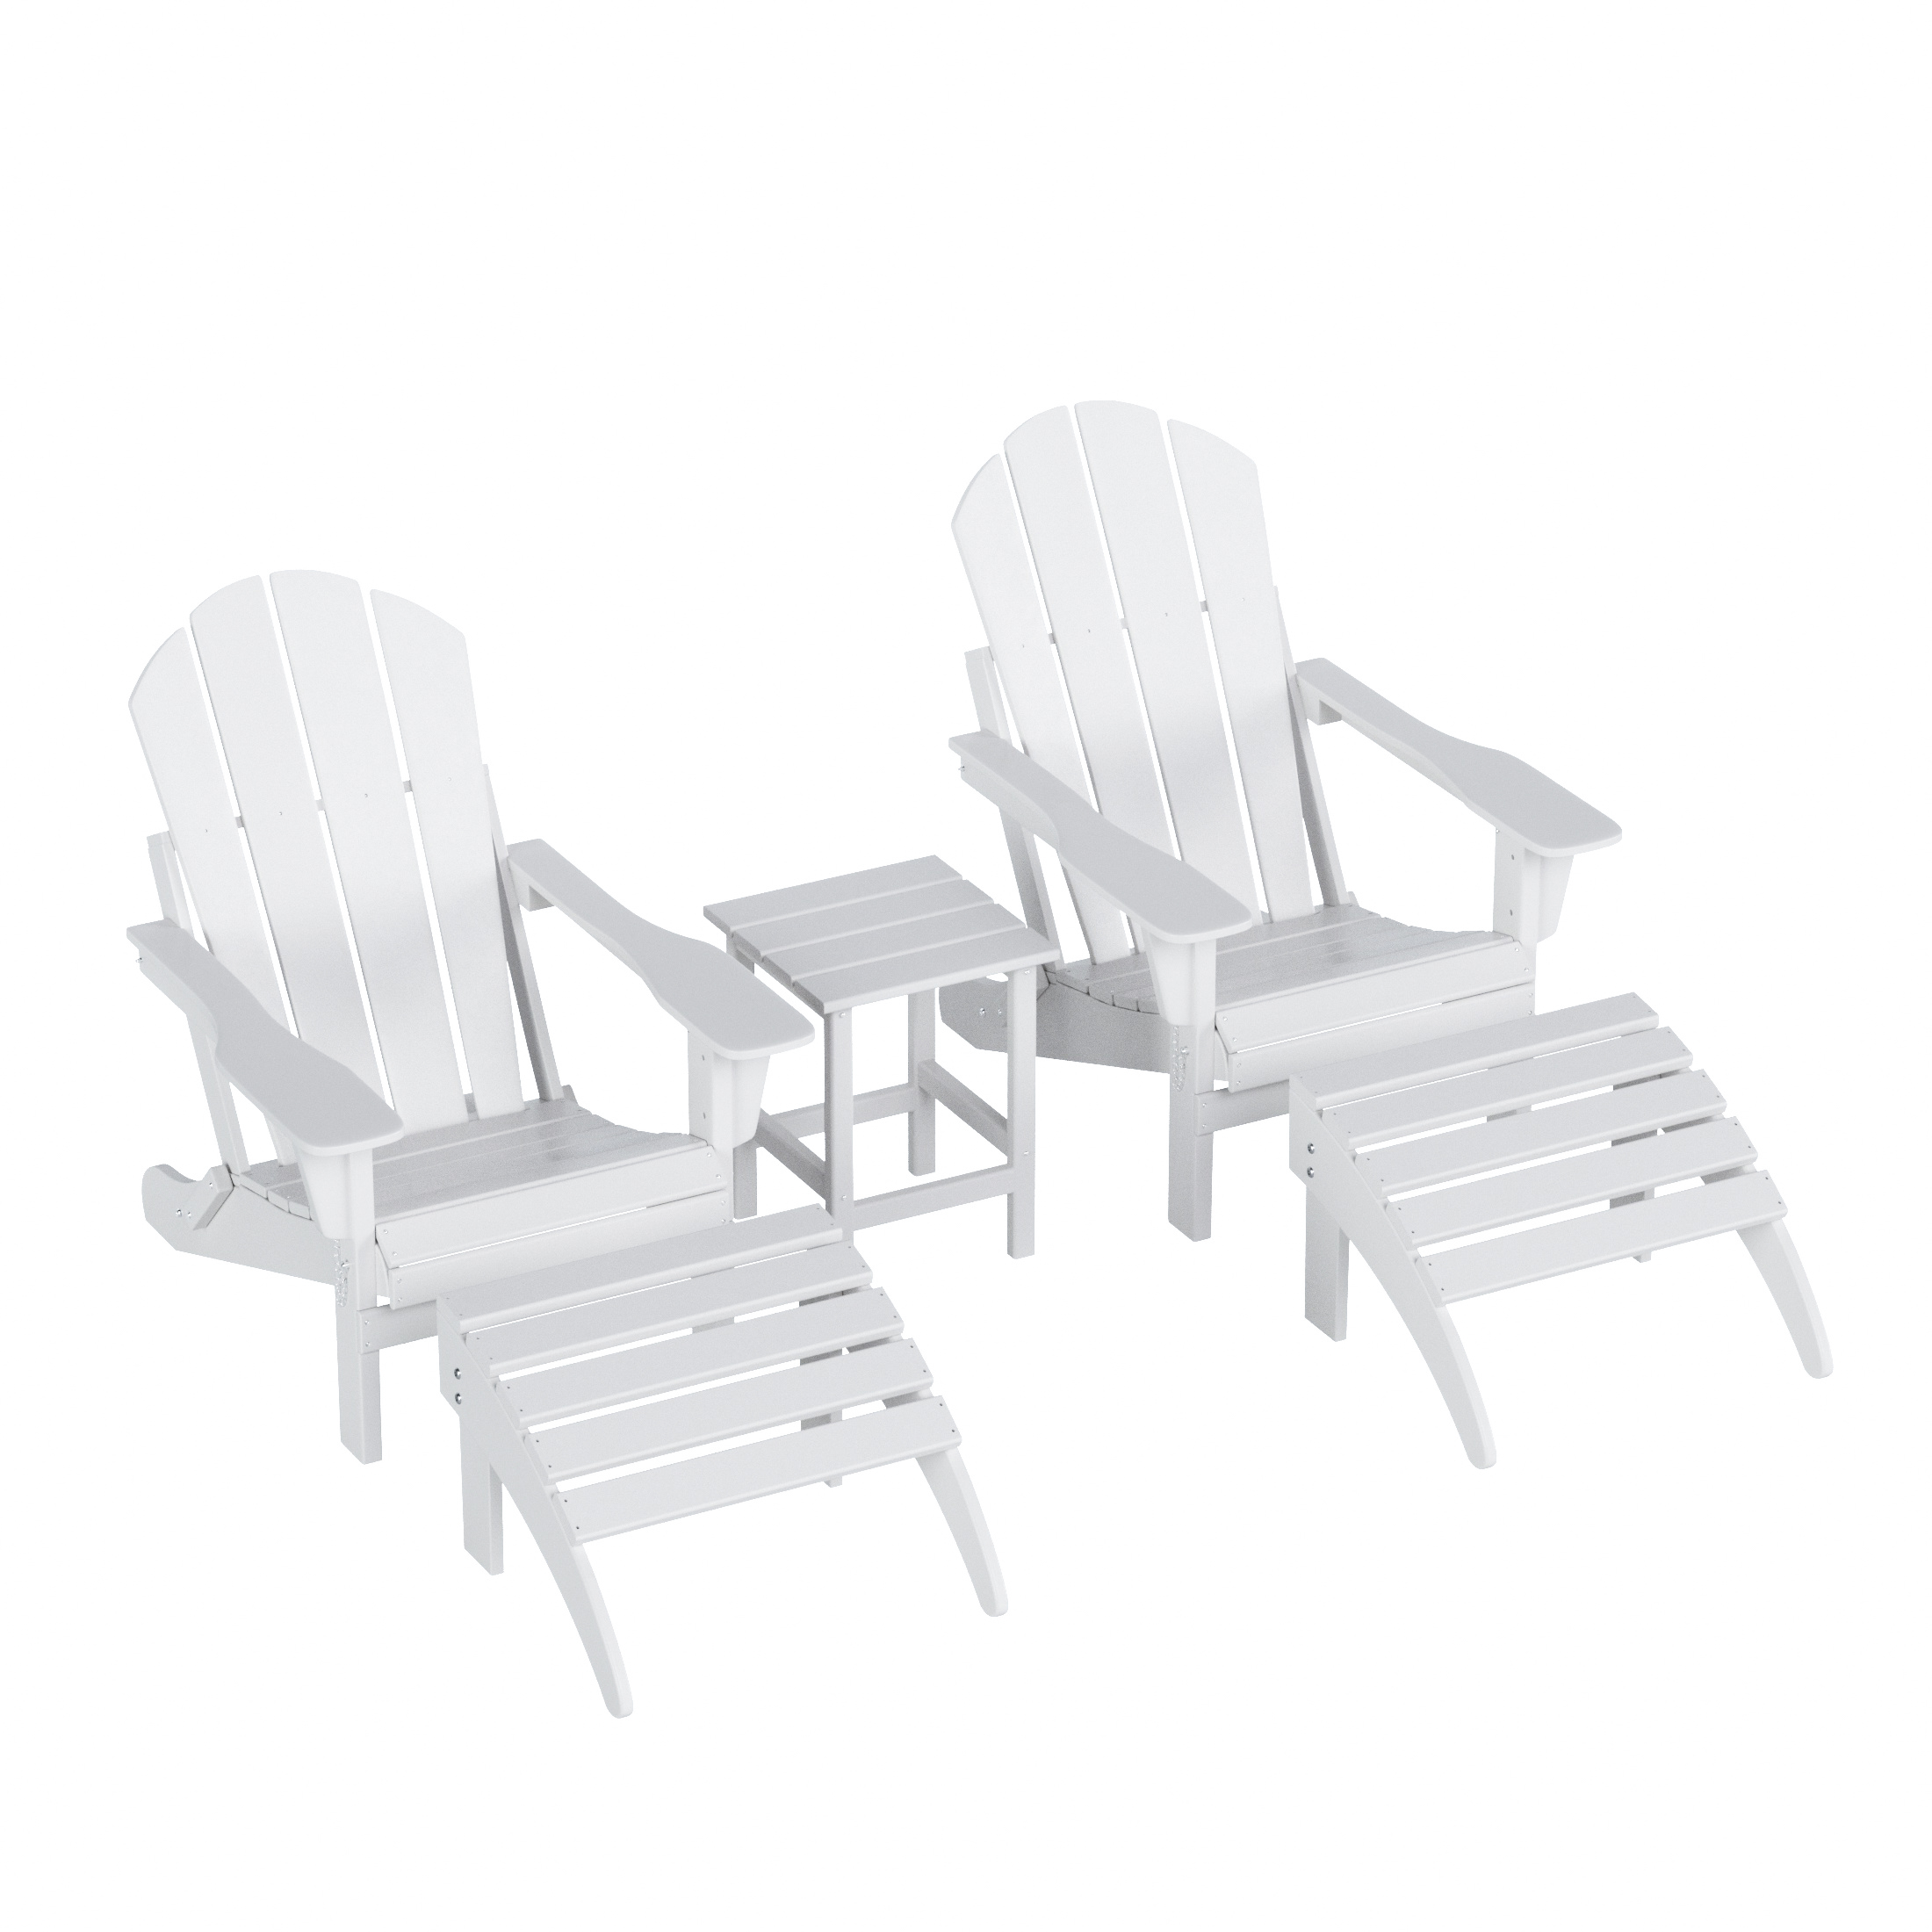 WestinTrends Malibu Outdoor Lounge Chairs Set, 5-Pieces Adirondack Chair Set of 2 with Ottoman and Side Table, All Weather Poly Lumber Patio Lawn Folding Chair for Outside, White - image 1 of 7